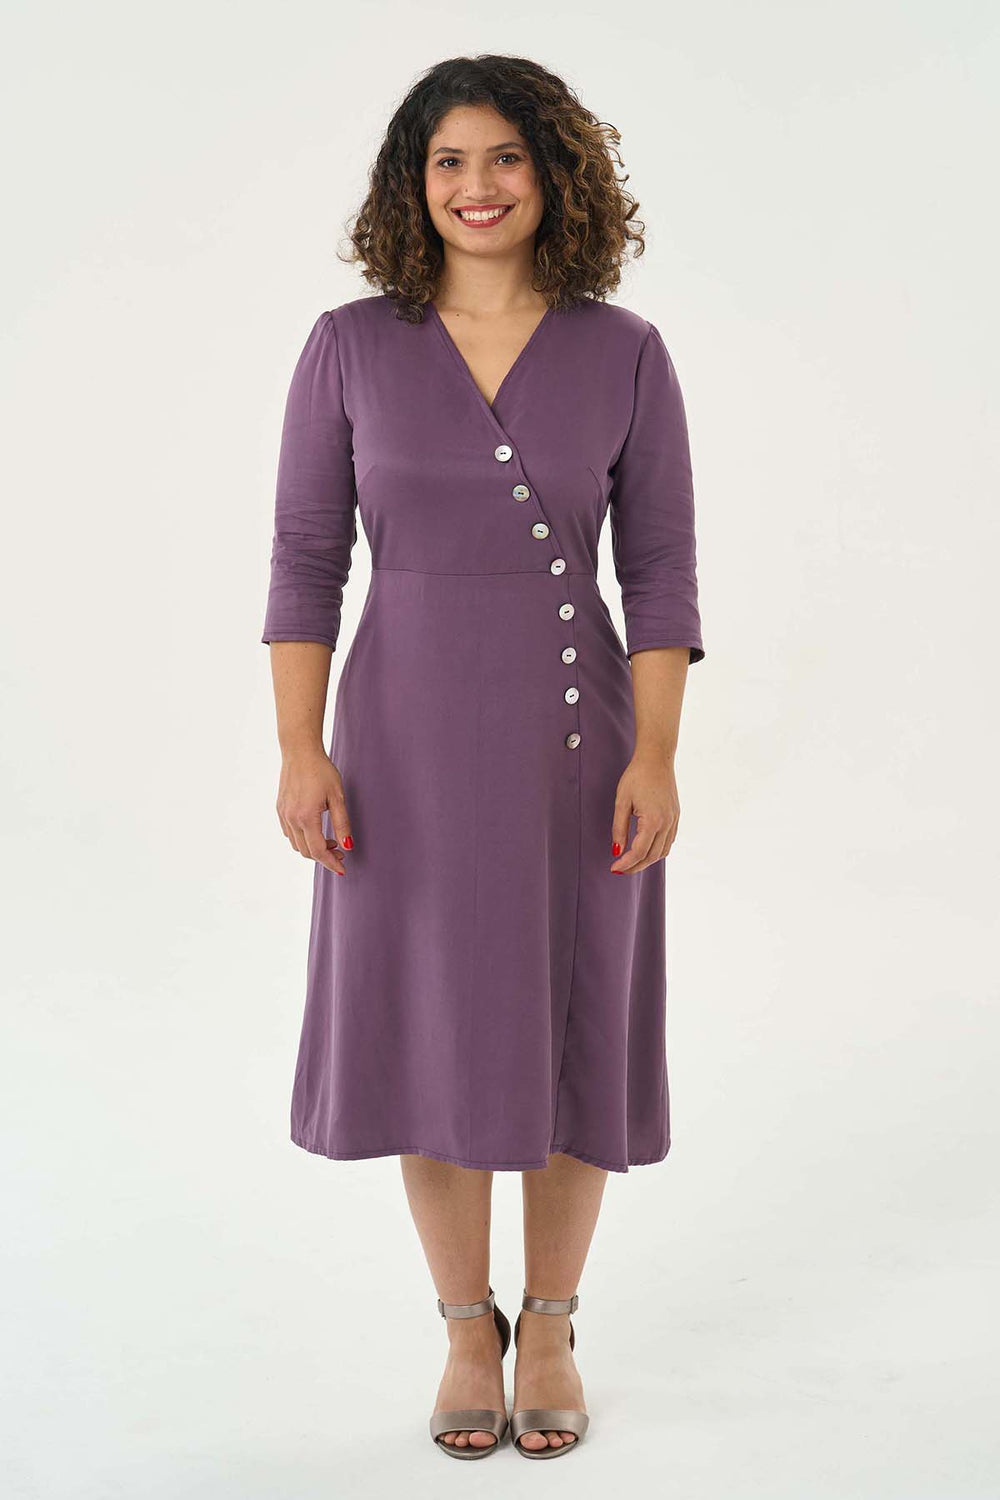 Woman wearing the Pippa Dress sewing pattern from Sew Over It on The Fold Line. A dress pattern made in rayon, viscose and crepe fabrics, featuring a front asymmetrical line of buttons, bust darts, back bodice waist darts, side invisible zip closure, V-ne